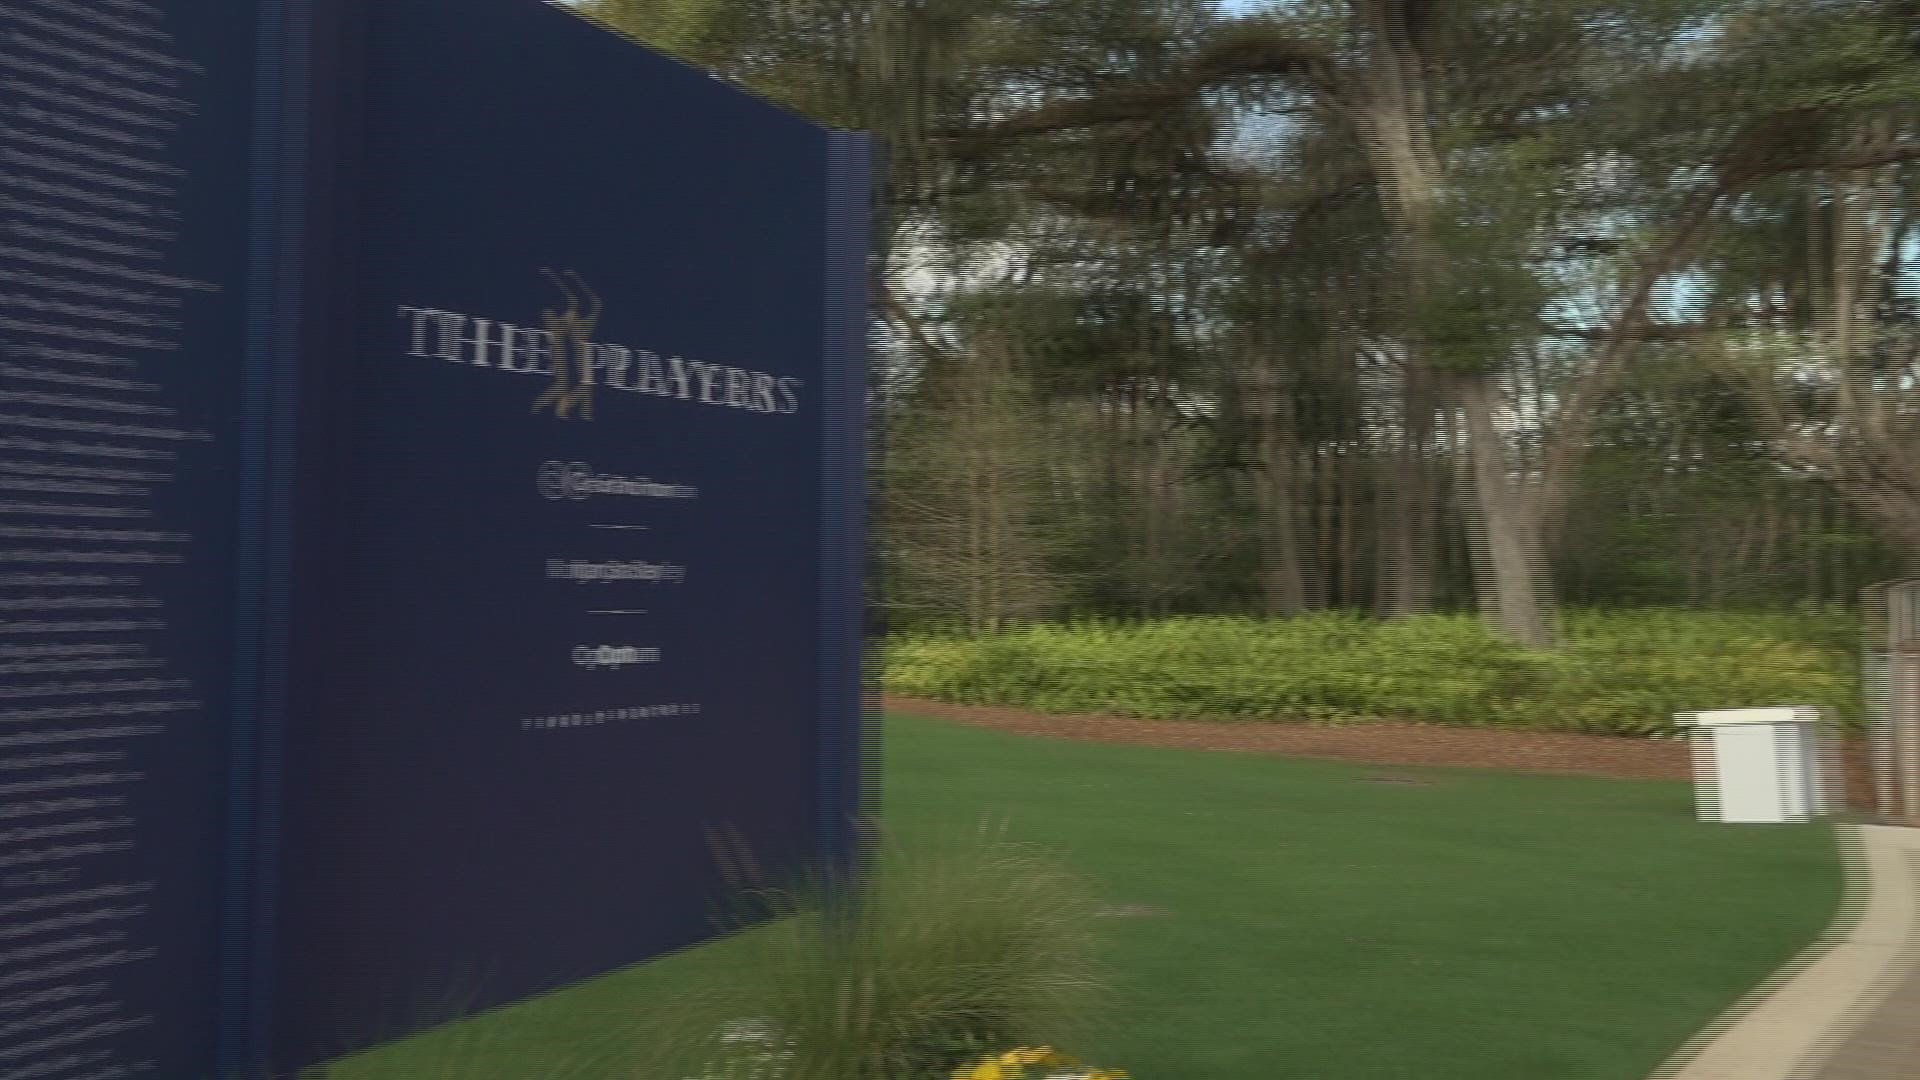 What are some things you absolutely have to do at The PLAYERS Championship this weekend - both inside and outside the ropes? Sports Anchor Mia O'Brien has your guide